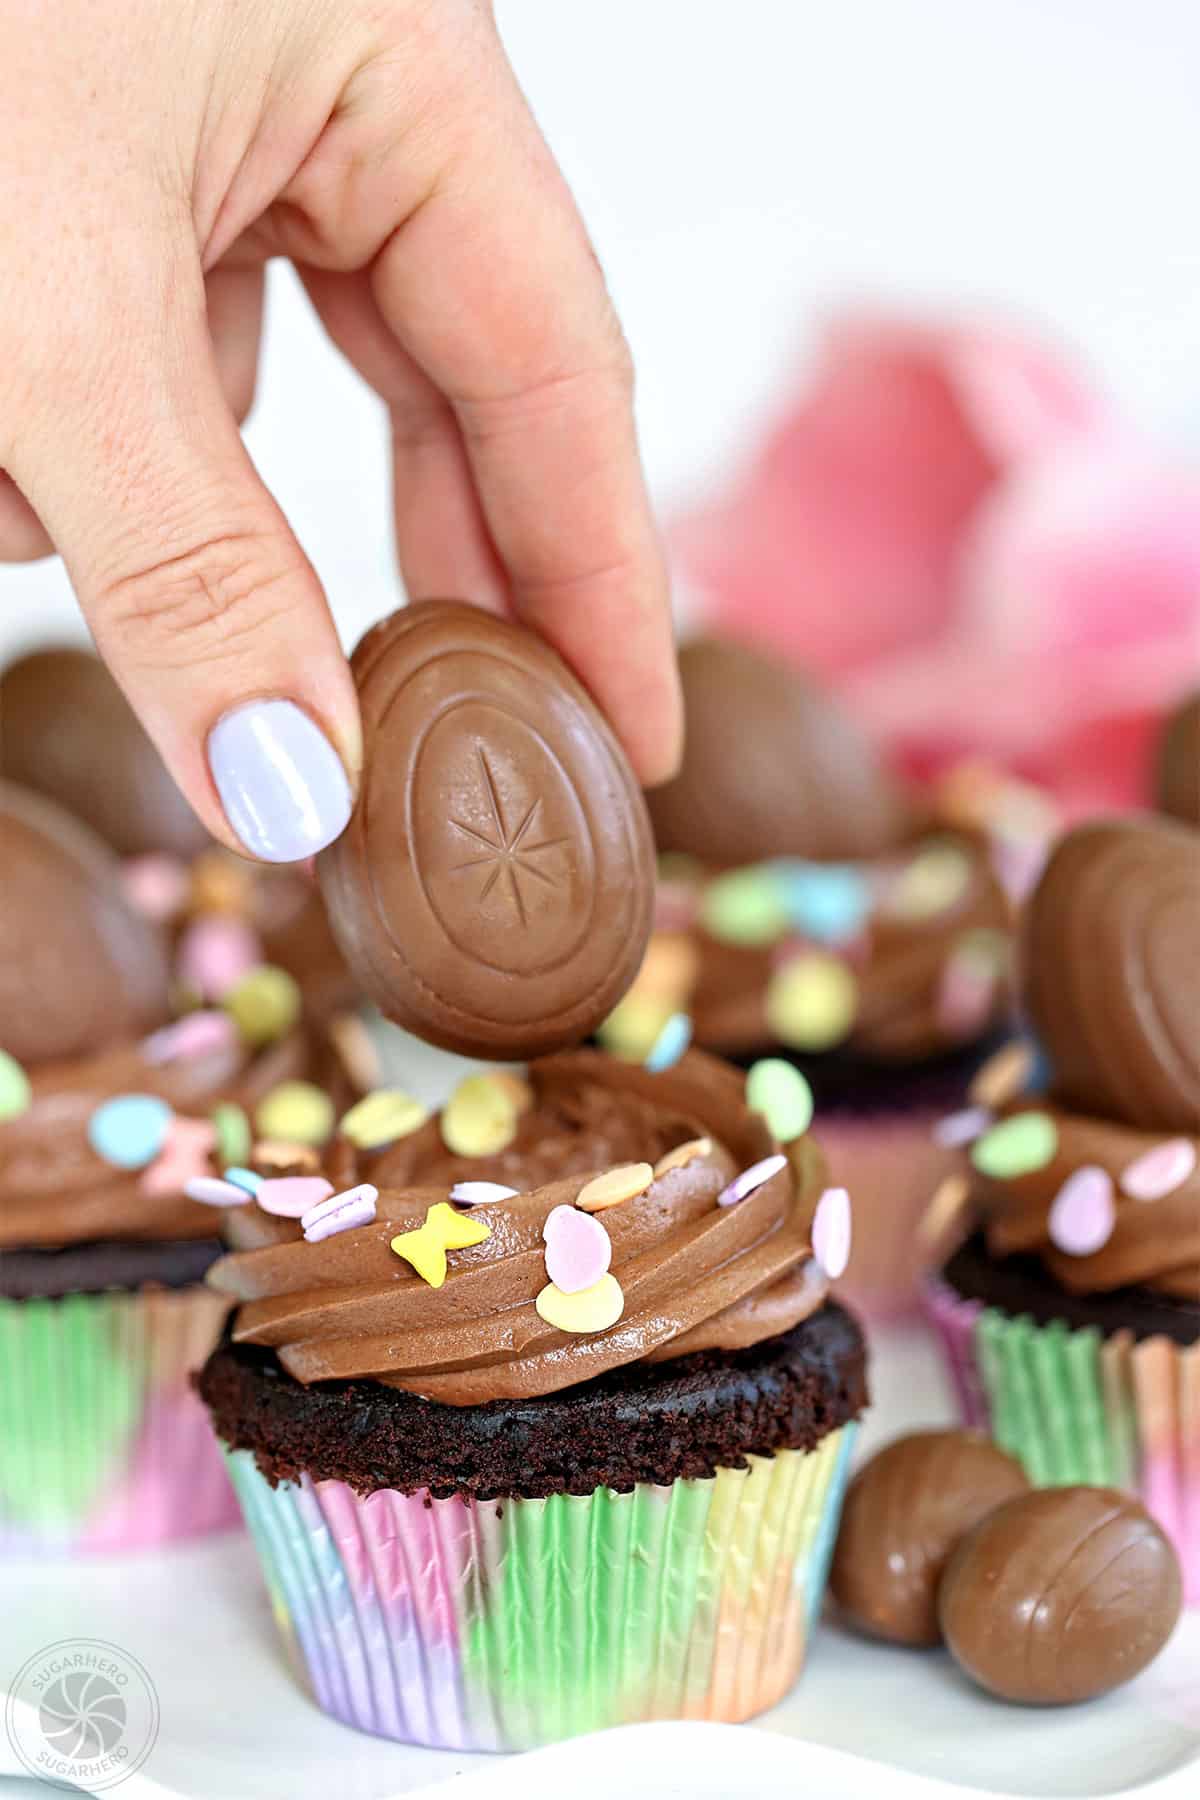 Hand with purple fingernail placing a chocolate egg on top of a chocolate cupcake